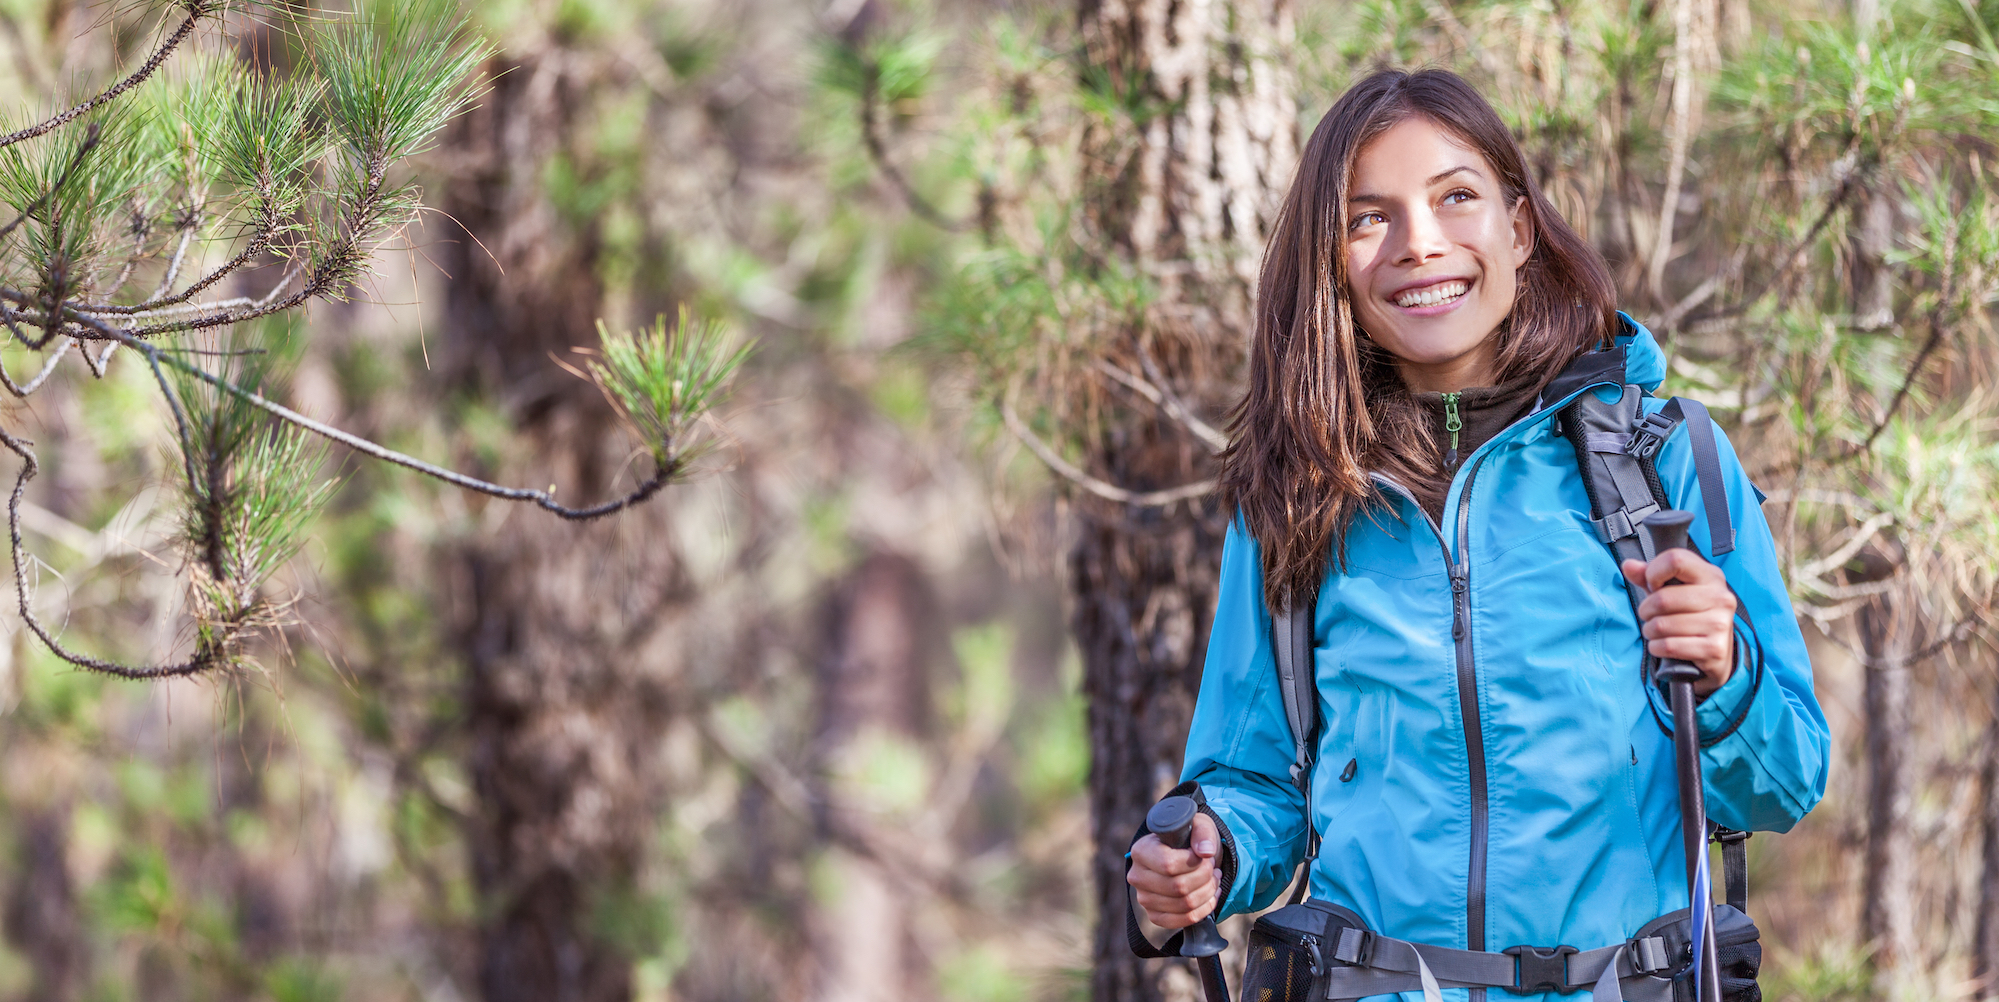 A girl in a blue rain jacket holding hiking poles smiling up at the towering pine trees that surround her while on a hike